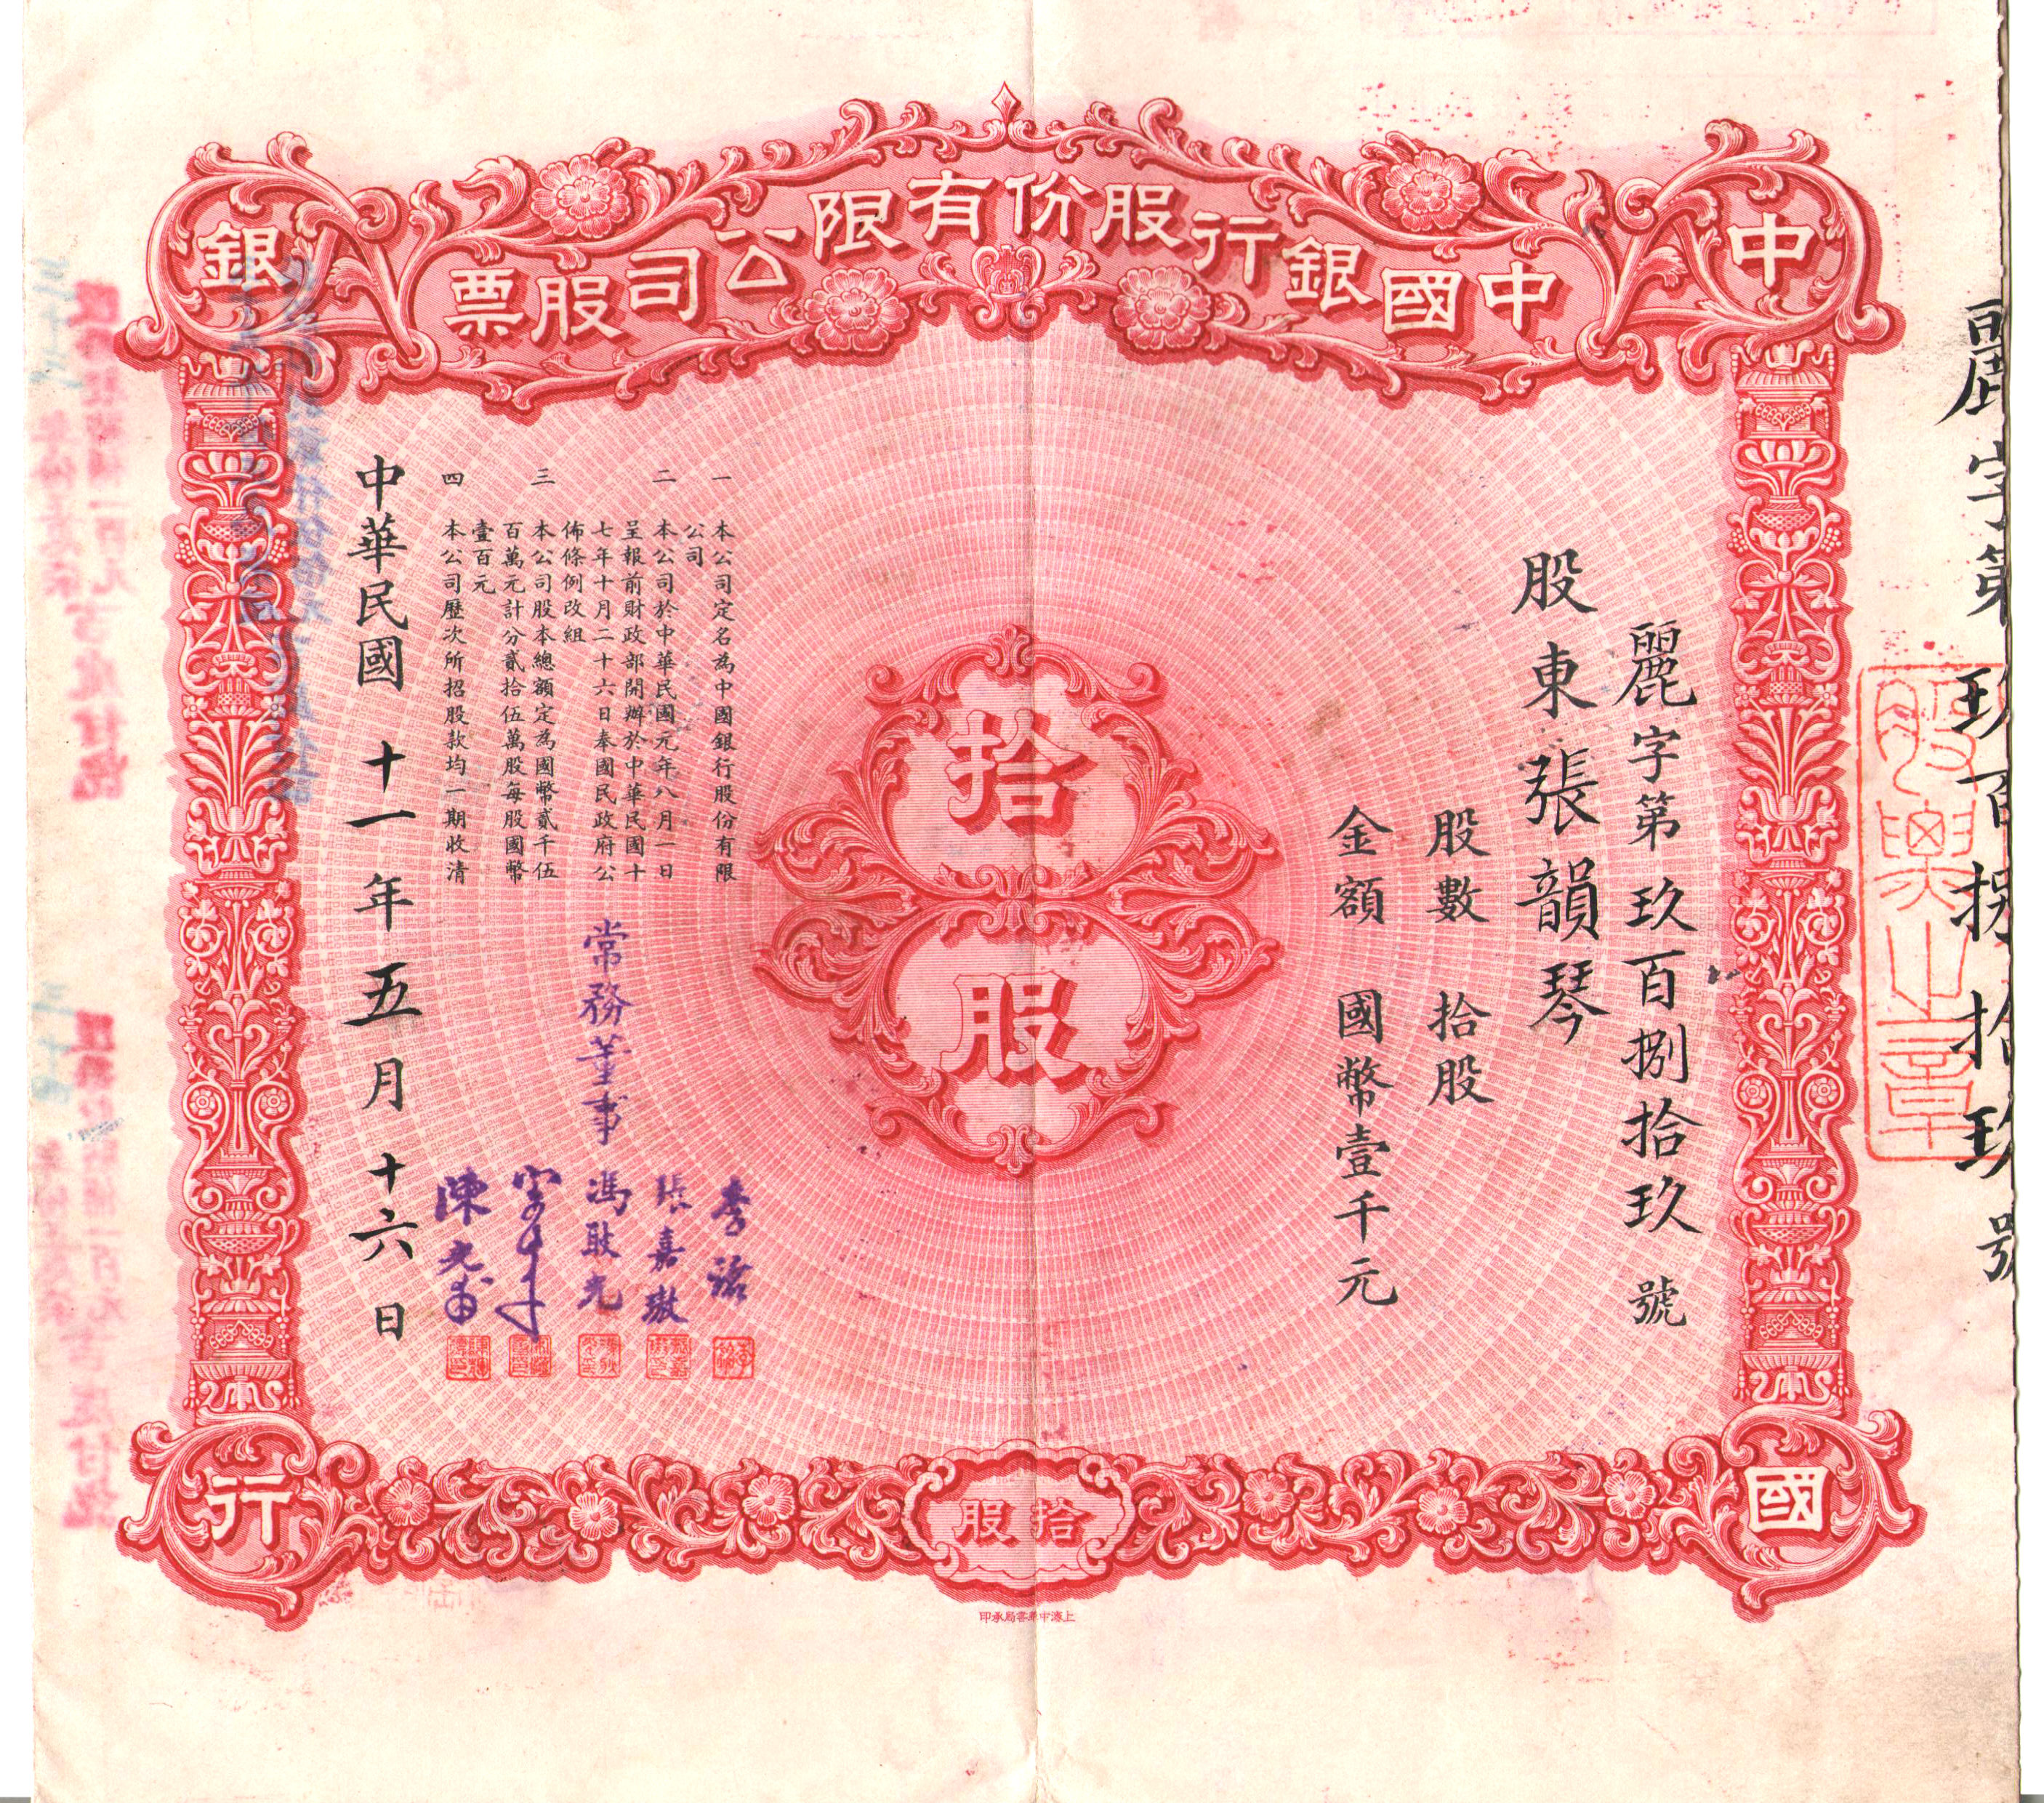 S0330, Bank of China Limited, Stock Certificate 10 Shares, China 1922